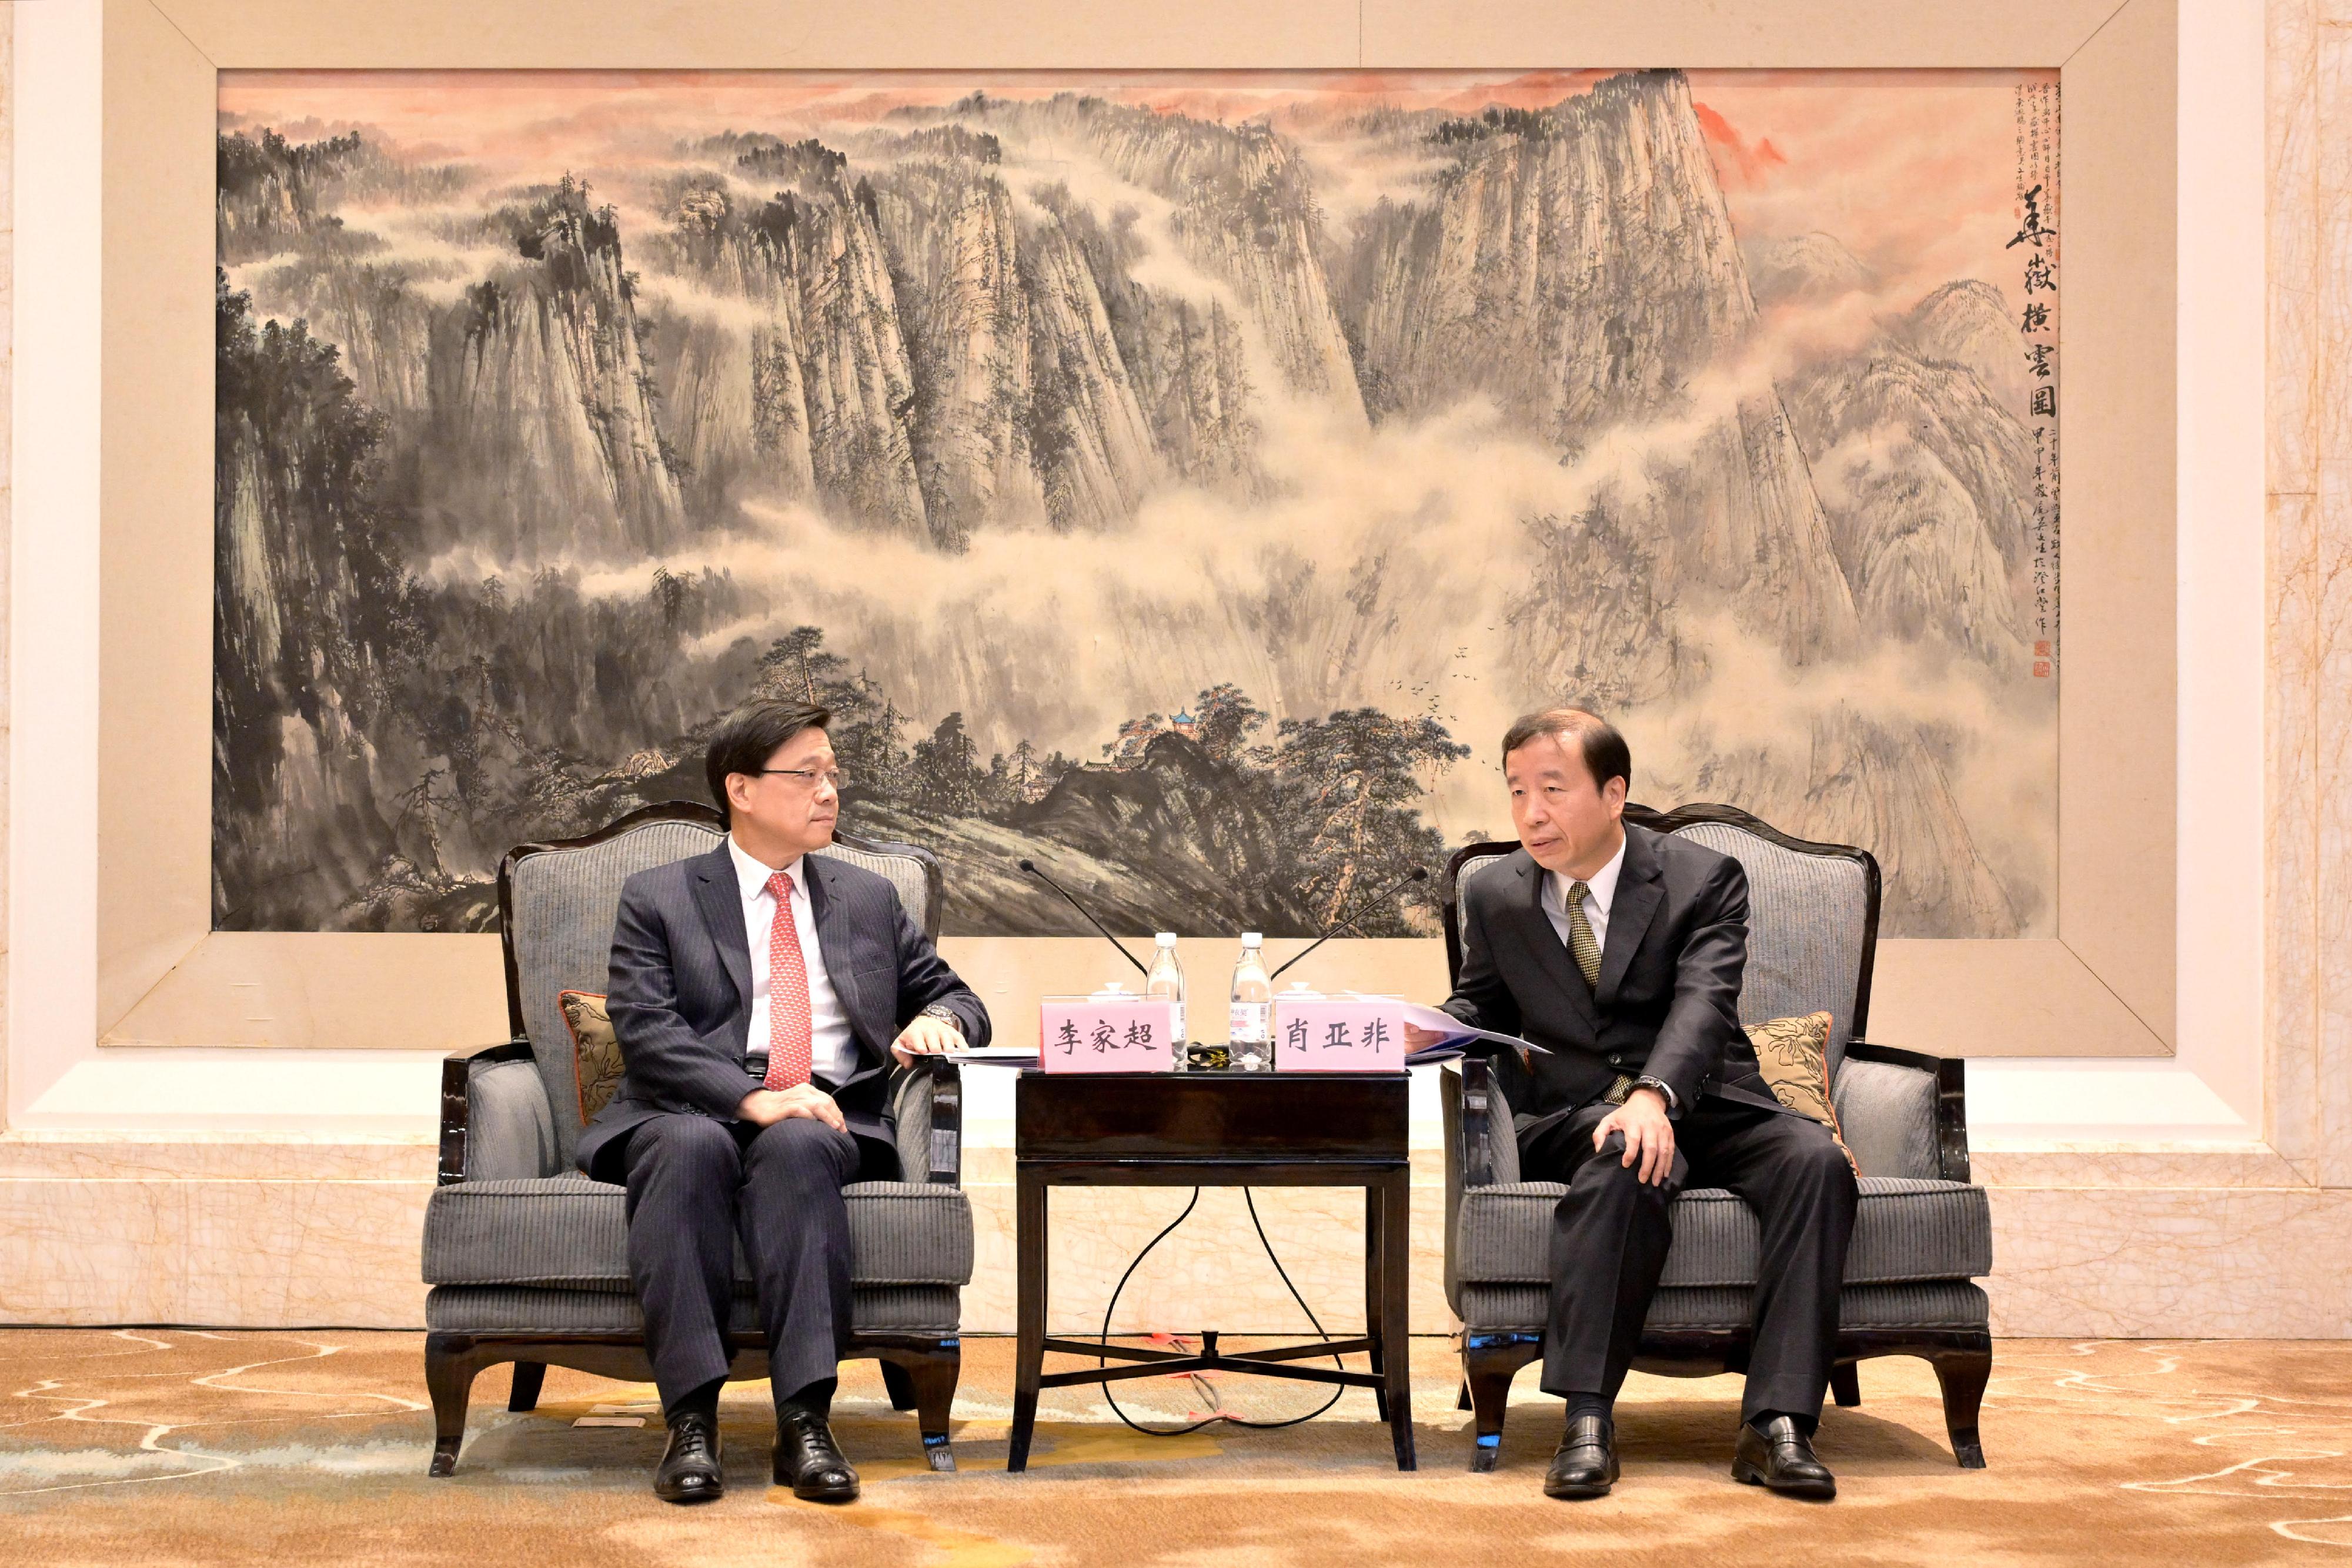 The Chief Executive, Mr John Lee (left), meets the Vice-Chairman of the Standing Committee of the Guangdong Provincial People's Congress and the Secretary of the CPC Dongguan Municipal Committee, Mr Xiao Yafei, in Dongguan today (January 4).
